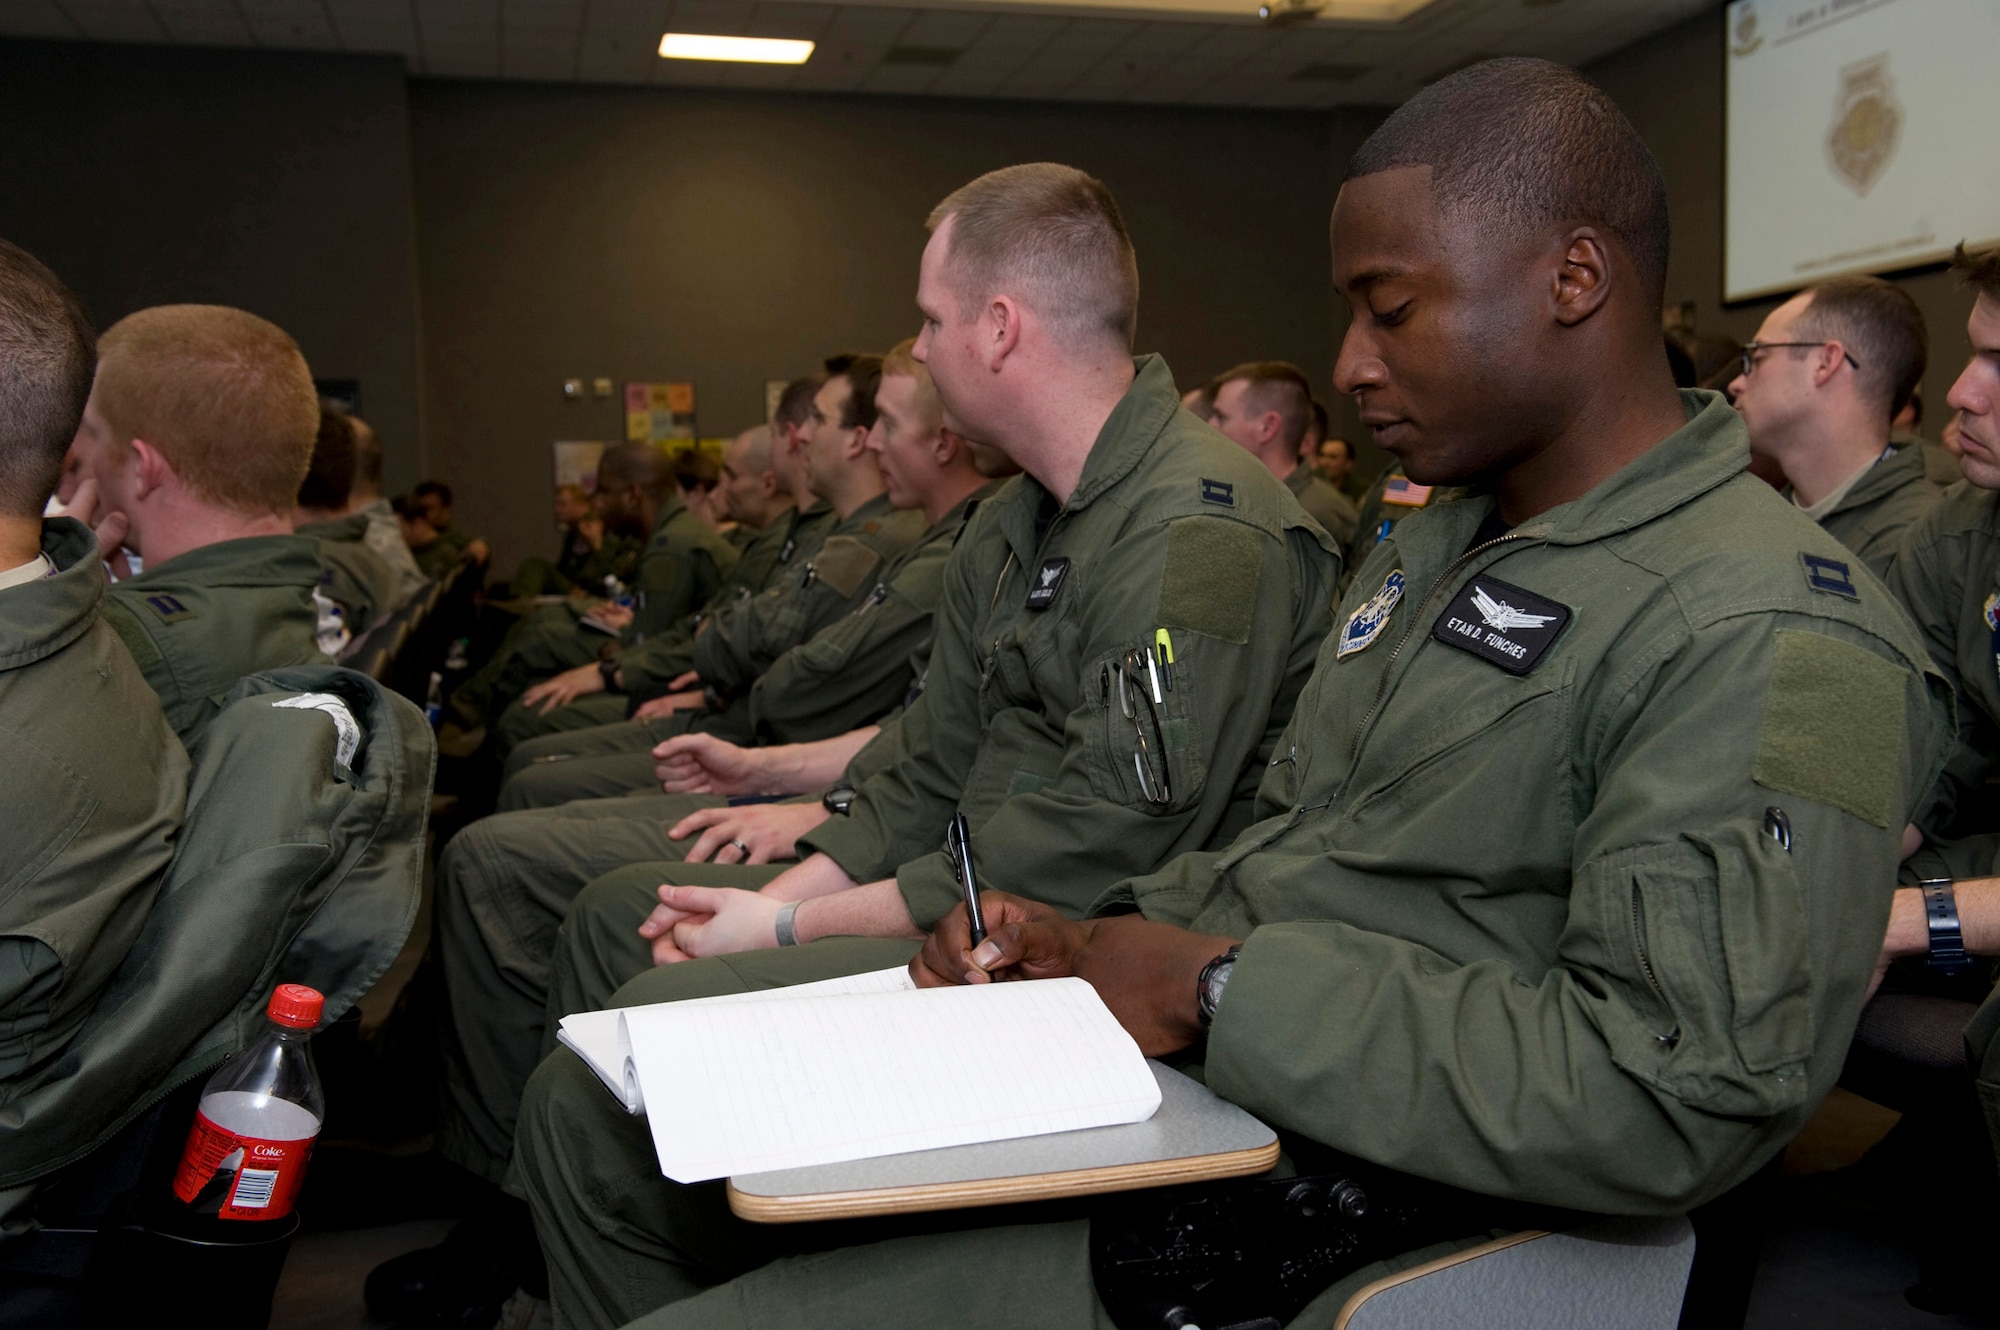 NELLIS AIR FORCE BASE, Nev. -- Capt. Etan Funches, U.S. Air Force Weapons School student, takes notes during a leadership course presented by Simon Sinek, an internationally renowned speaker and author of the book ?Start with Why: How Great Leaders Inspire Everyone to Take Action.?  Mr. Sinek helped the U.S. Air Force Weapons School develop a new curriculum focused on creating the next generation of Air Force leaders and helped introduce the program to students Feb. 22. (U.S. Air Force photo/Senior Airman Brett Clashman)